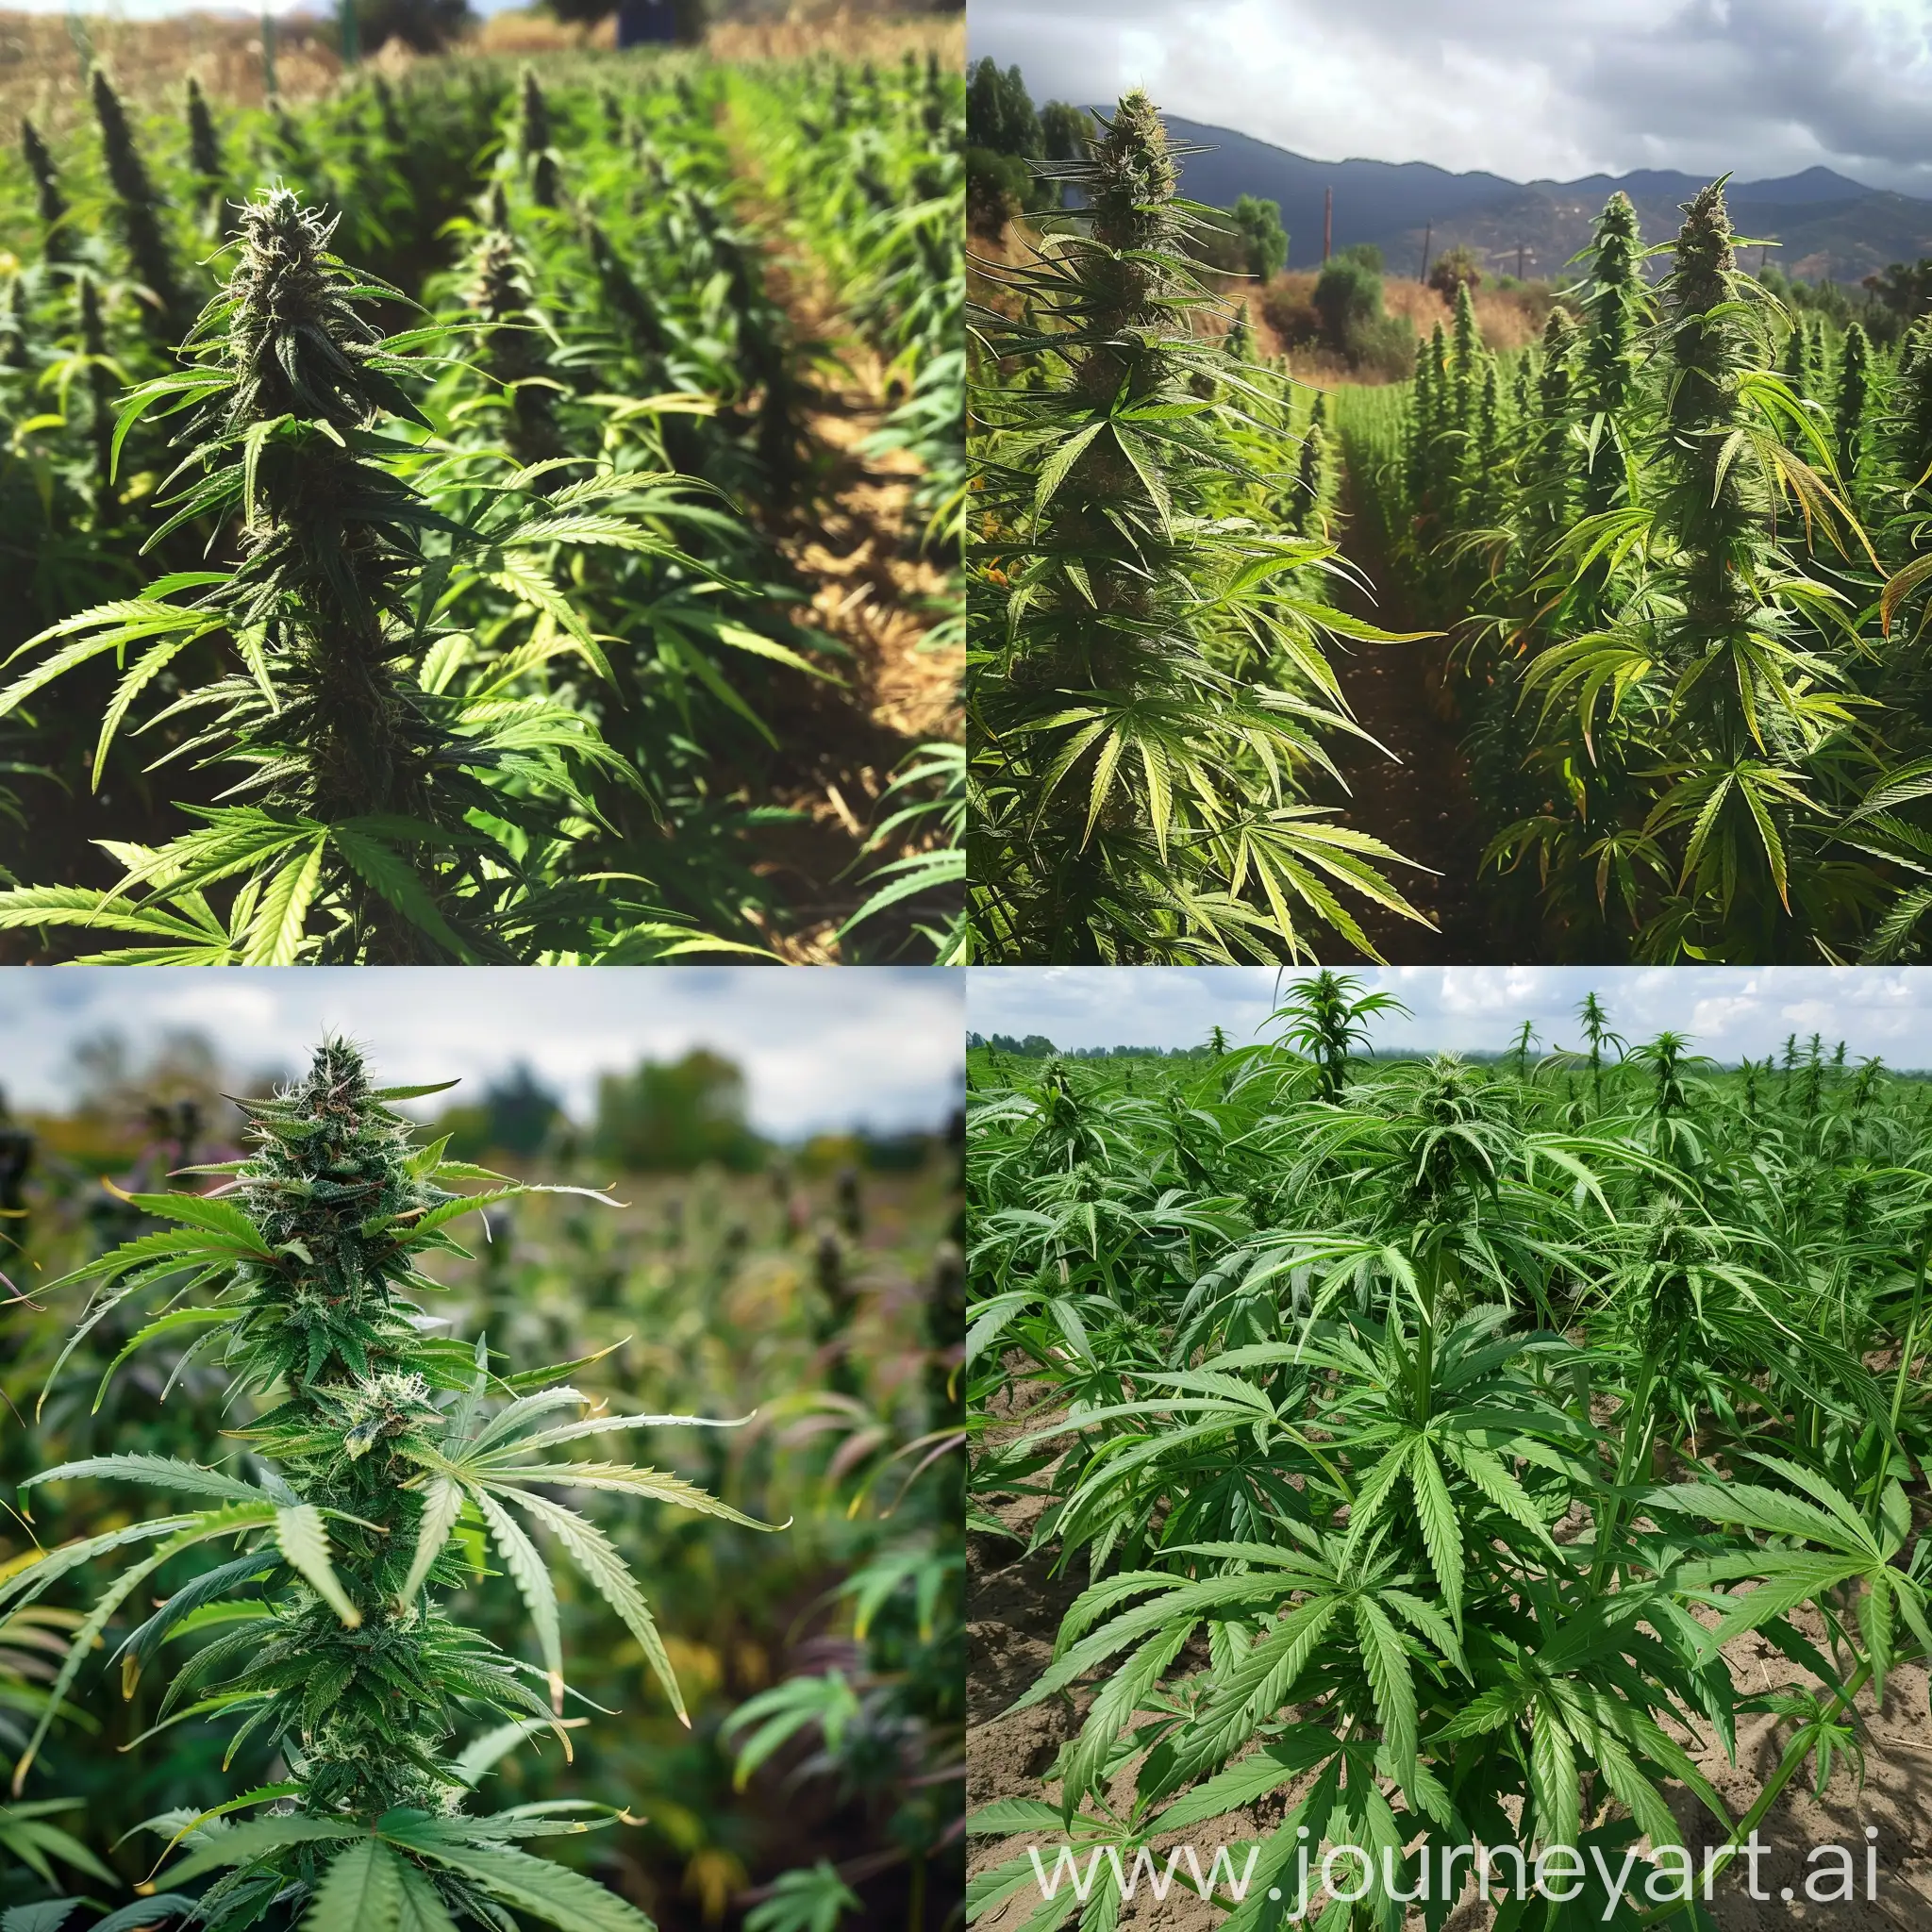 Vibrant-Cannabis-Fields-in-a-Square-Composition